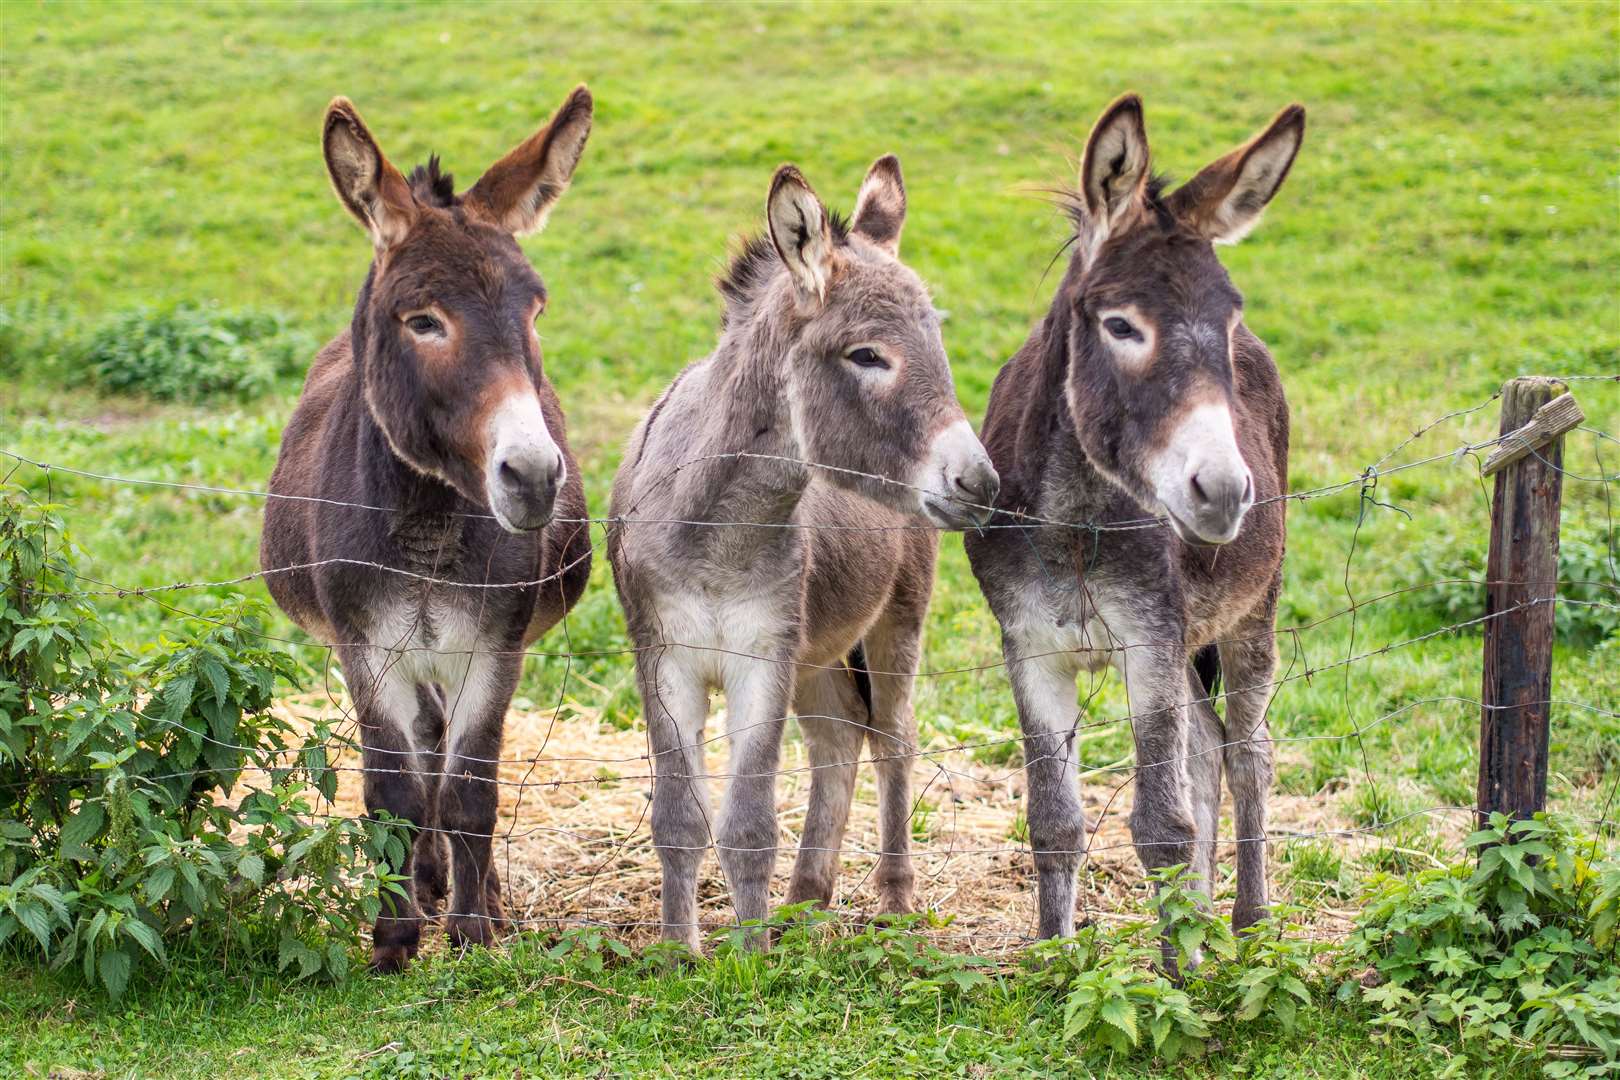 Donkeys play a significant part in biblical stories.